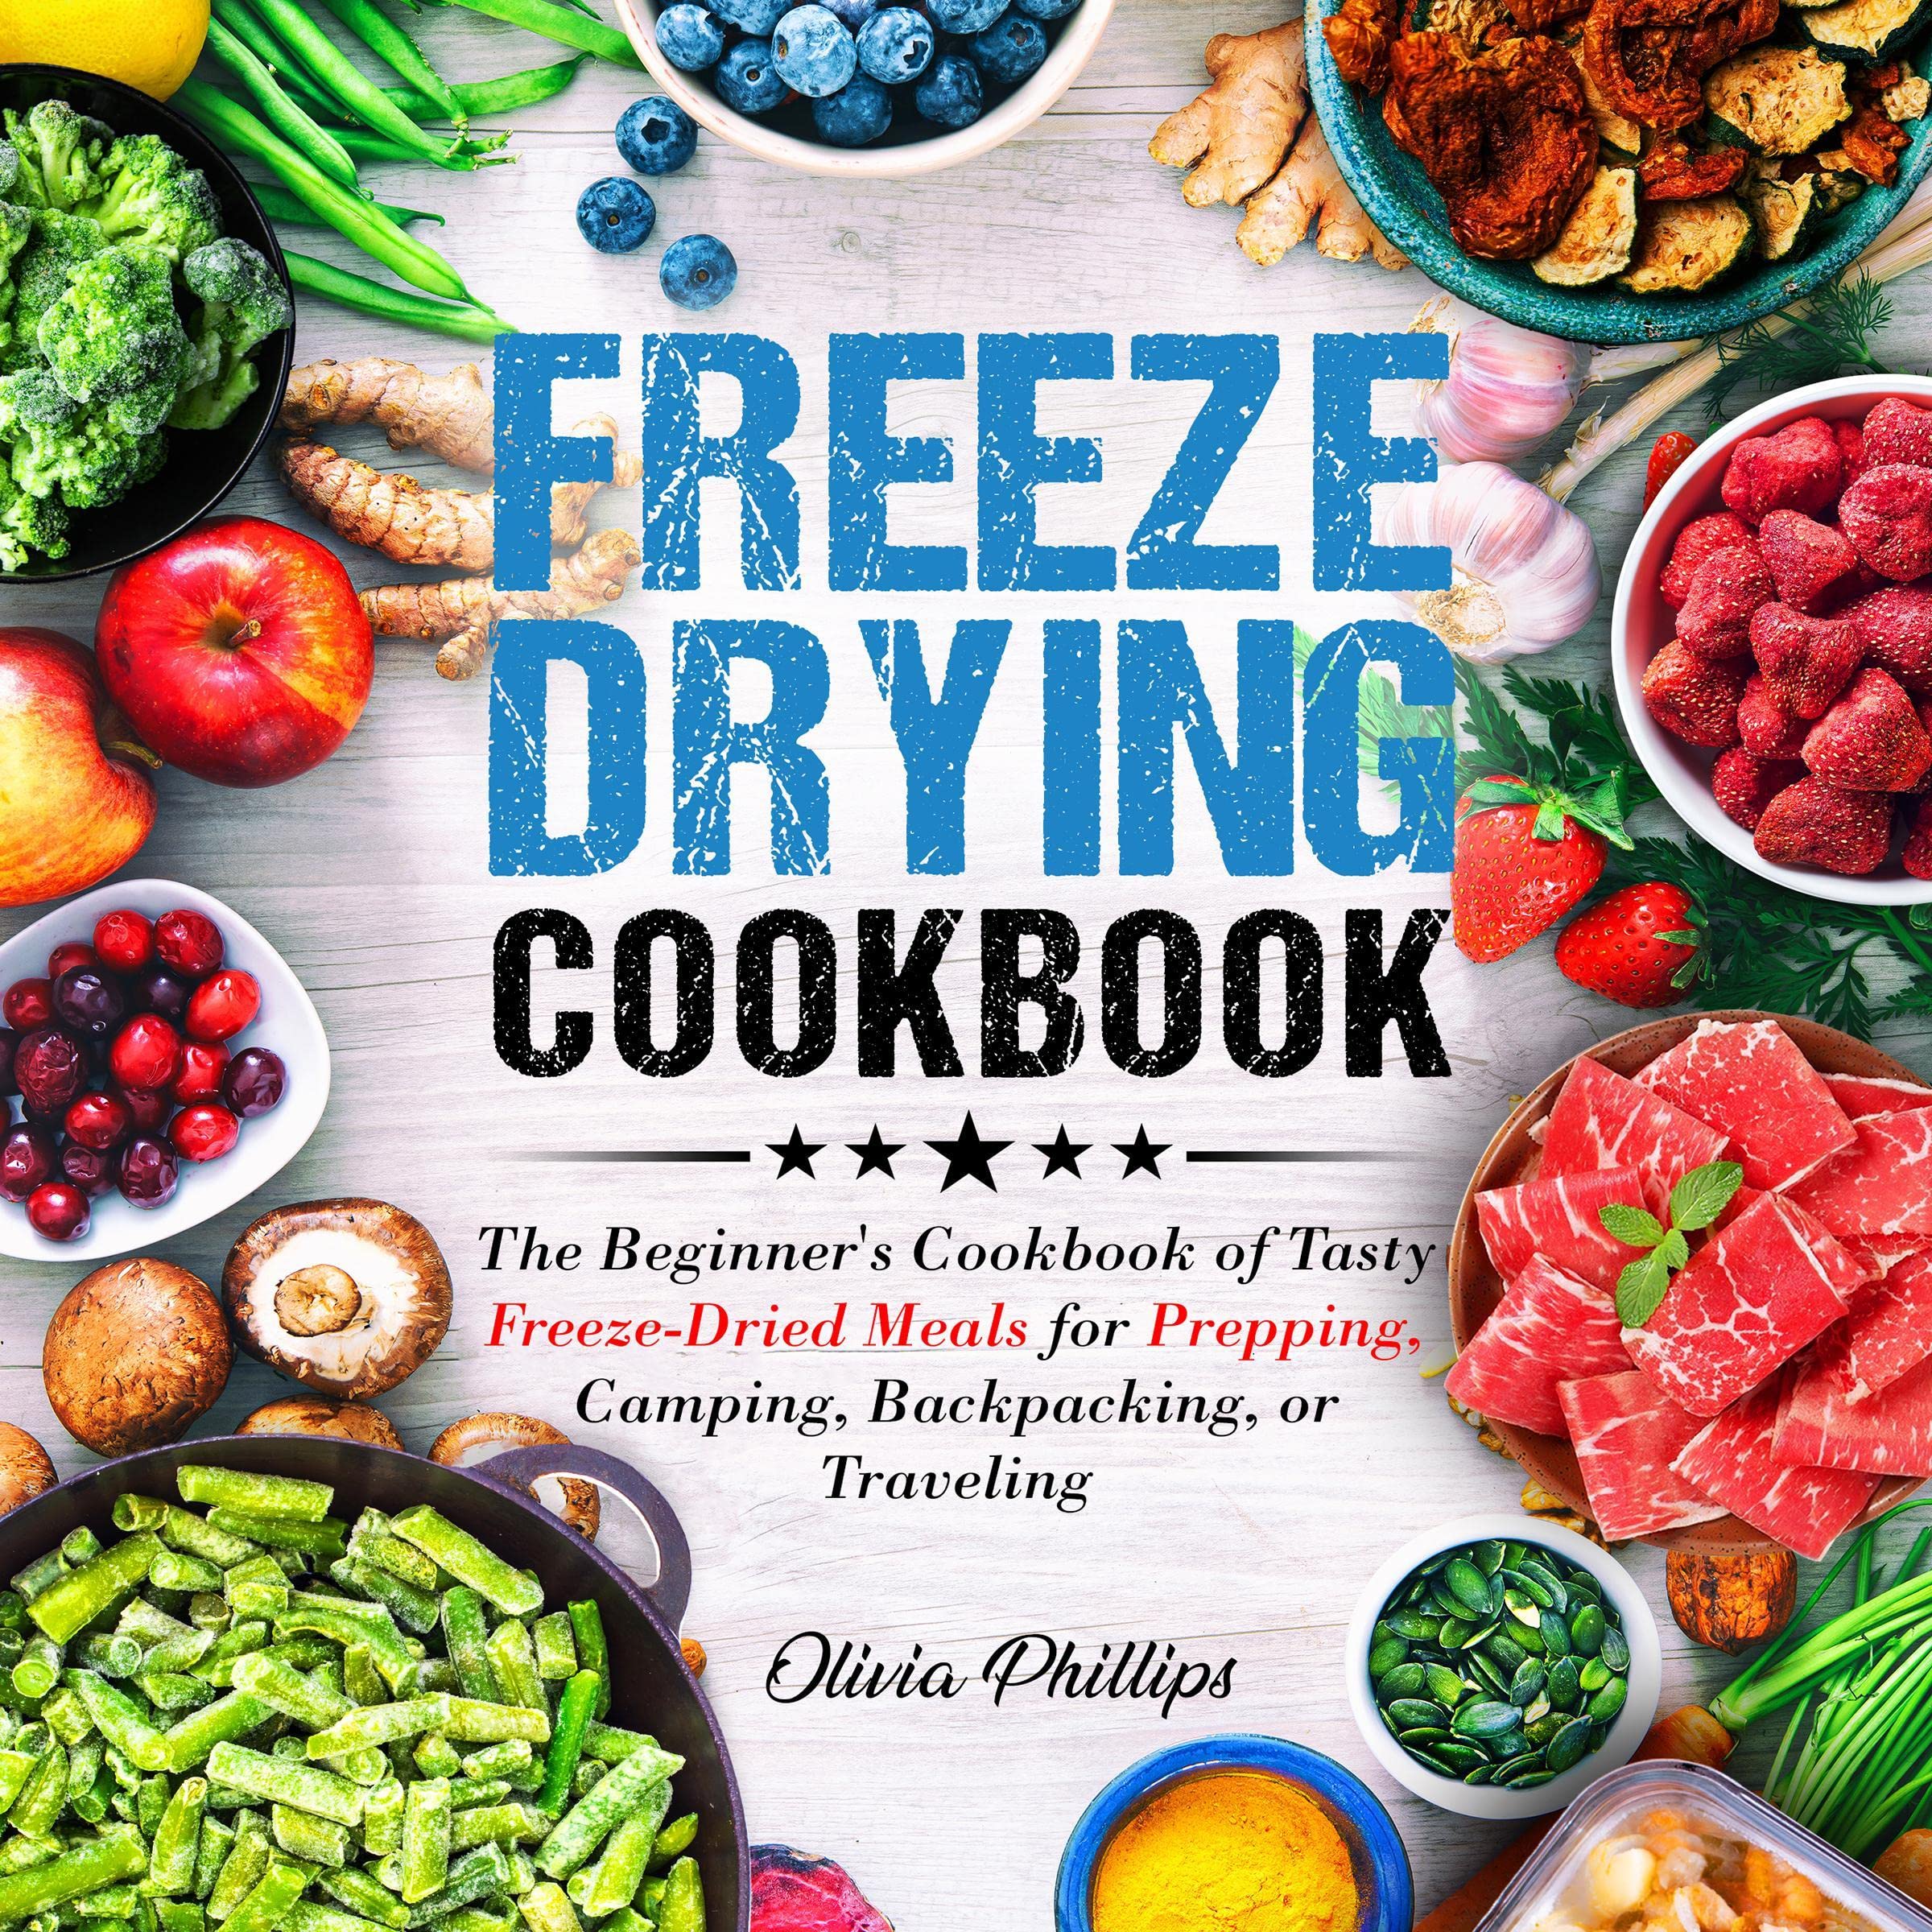 Freeze Drying Cookbook: The Beginner’s Cookbook of Tasty Freeze-Dried Meals for Prepping, Camping, Backpacking, or Traveling